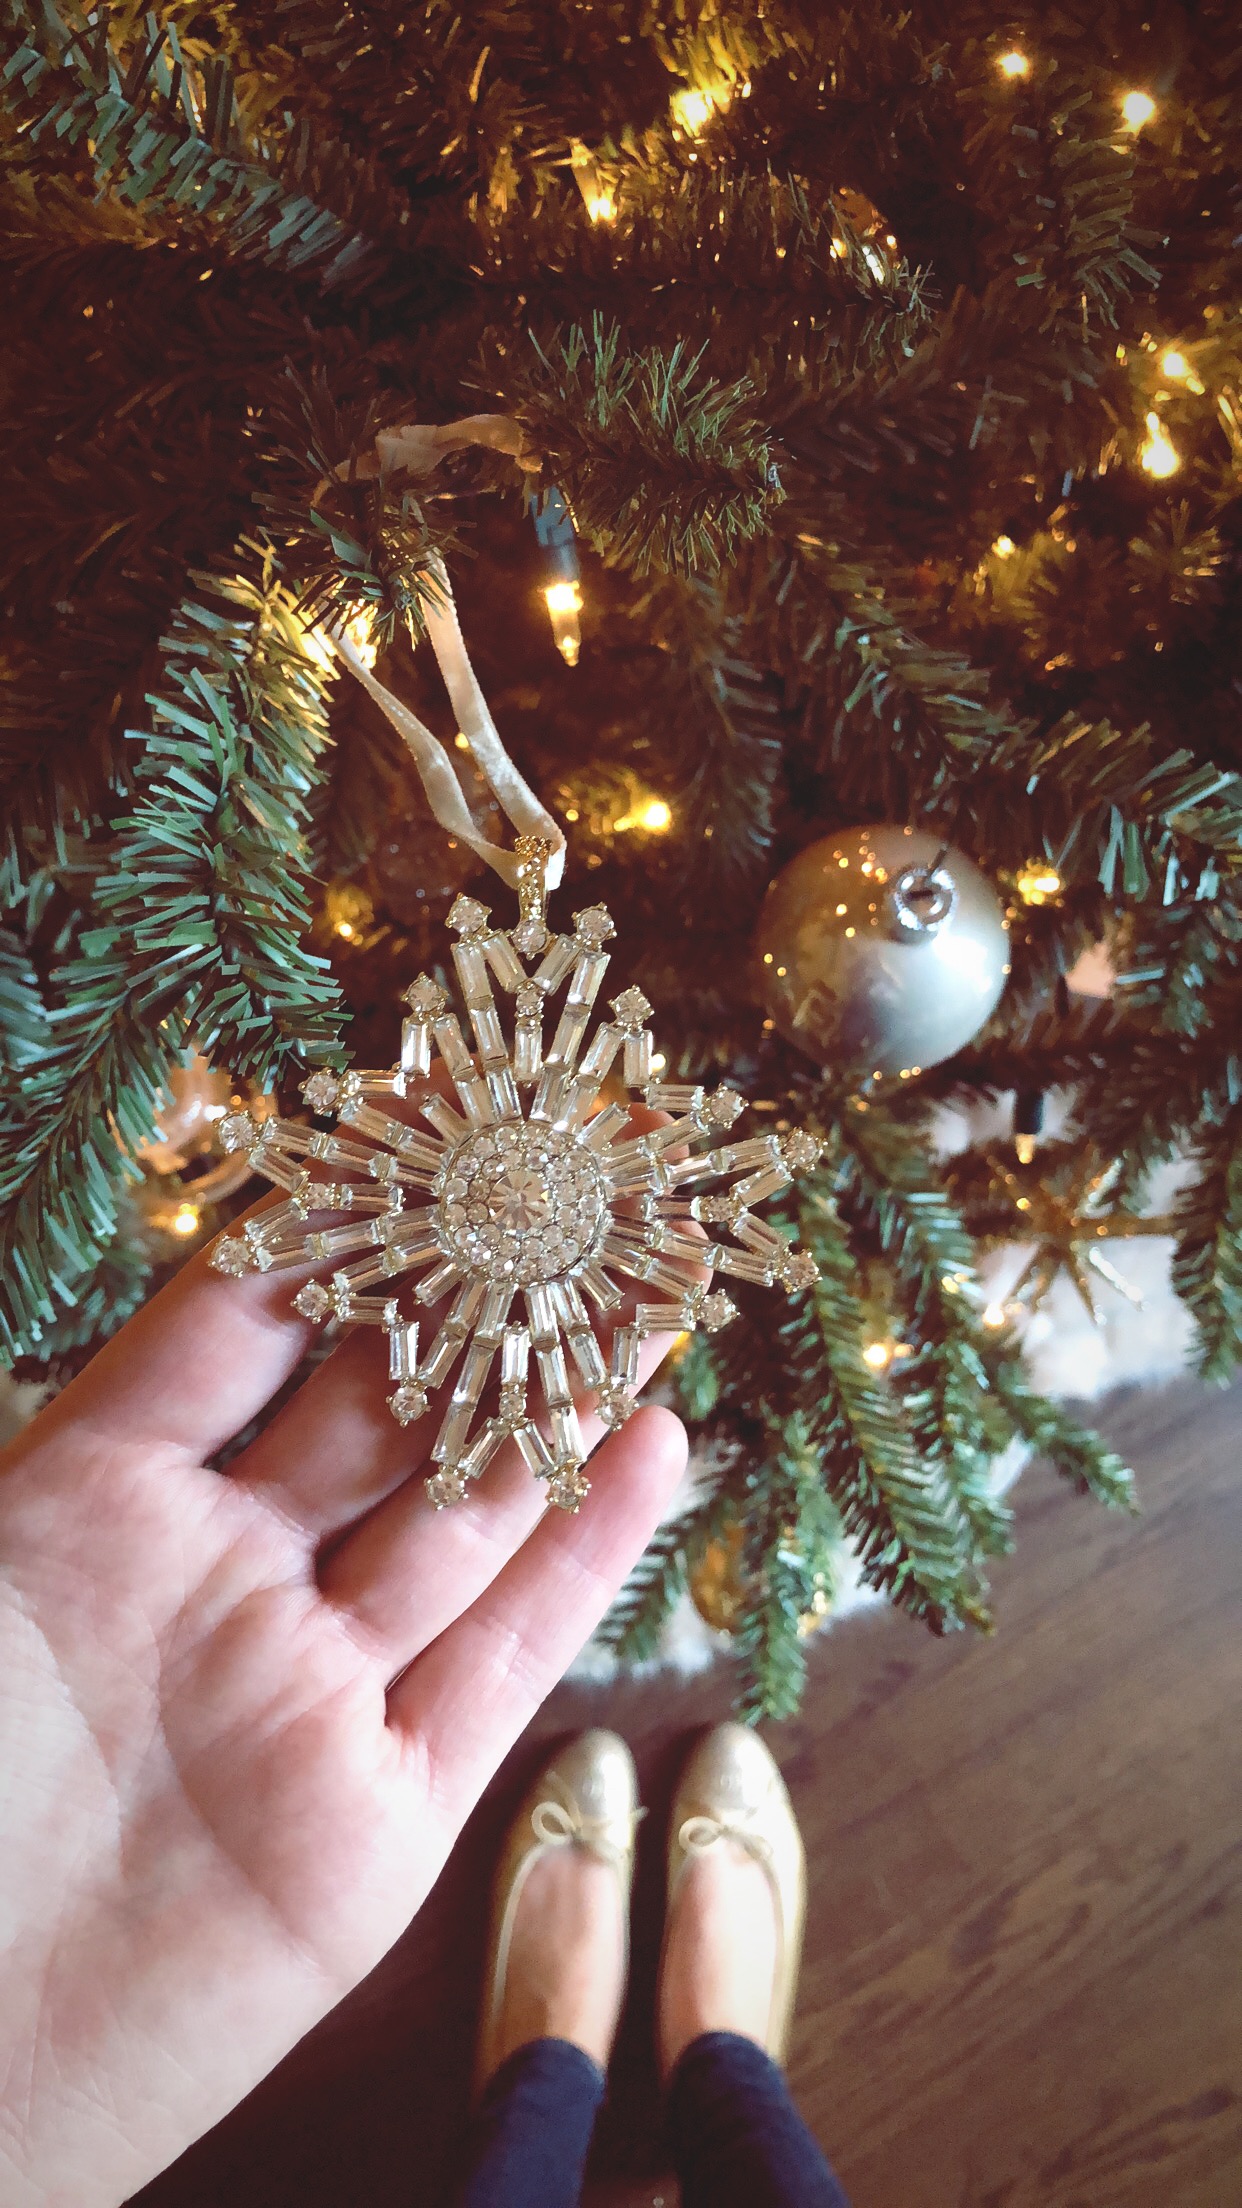 My Favorite Christmas Ornaments | The Style Scribe